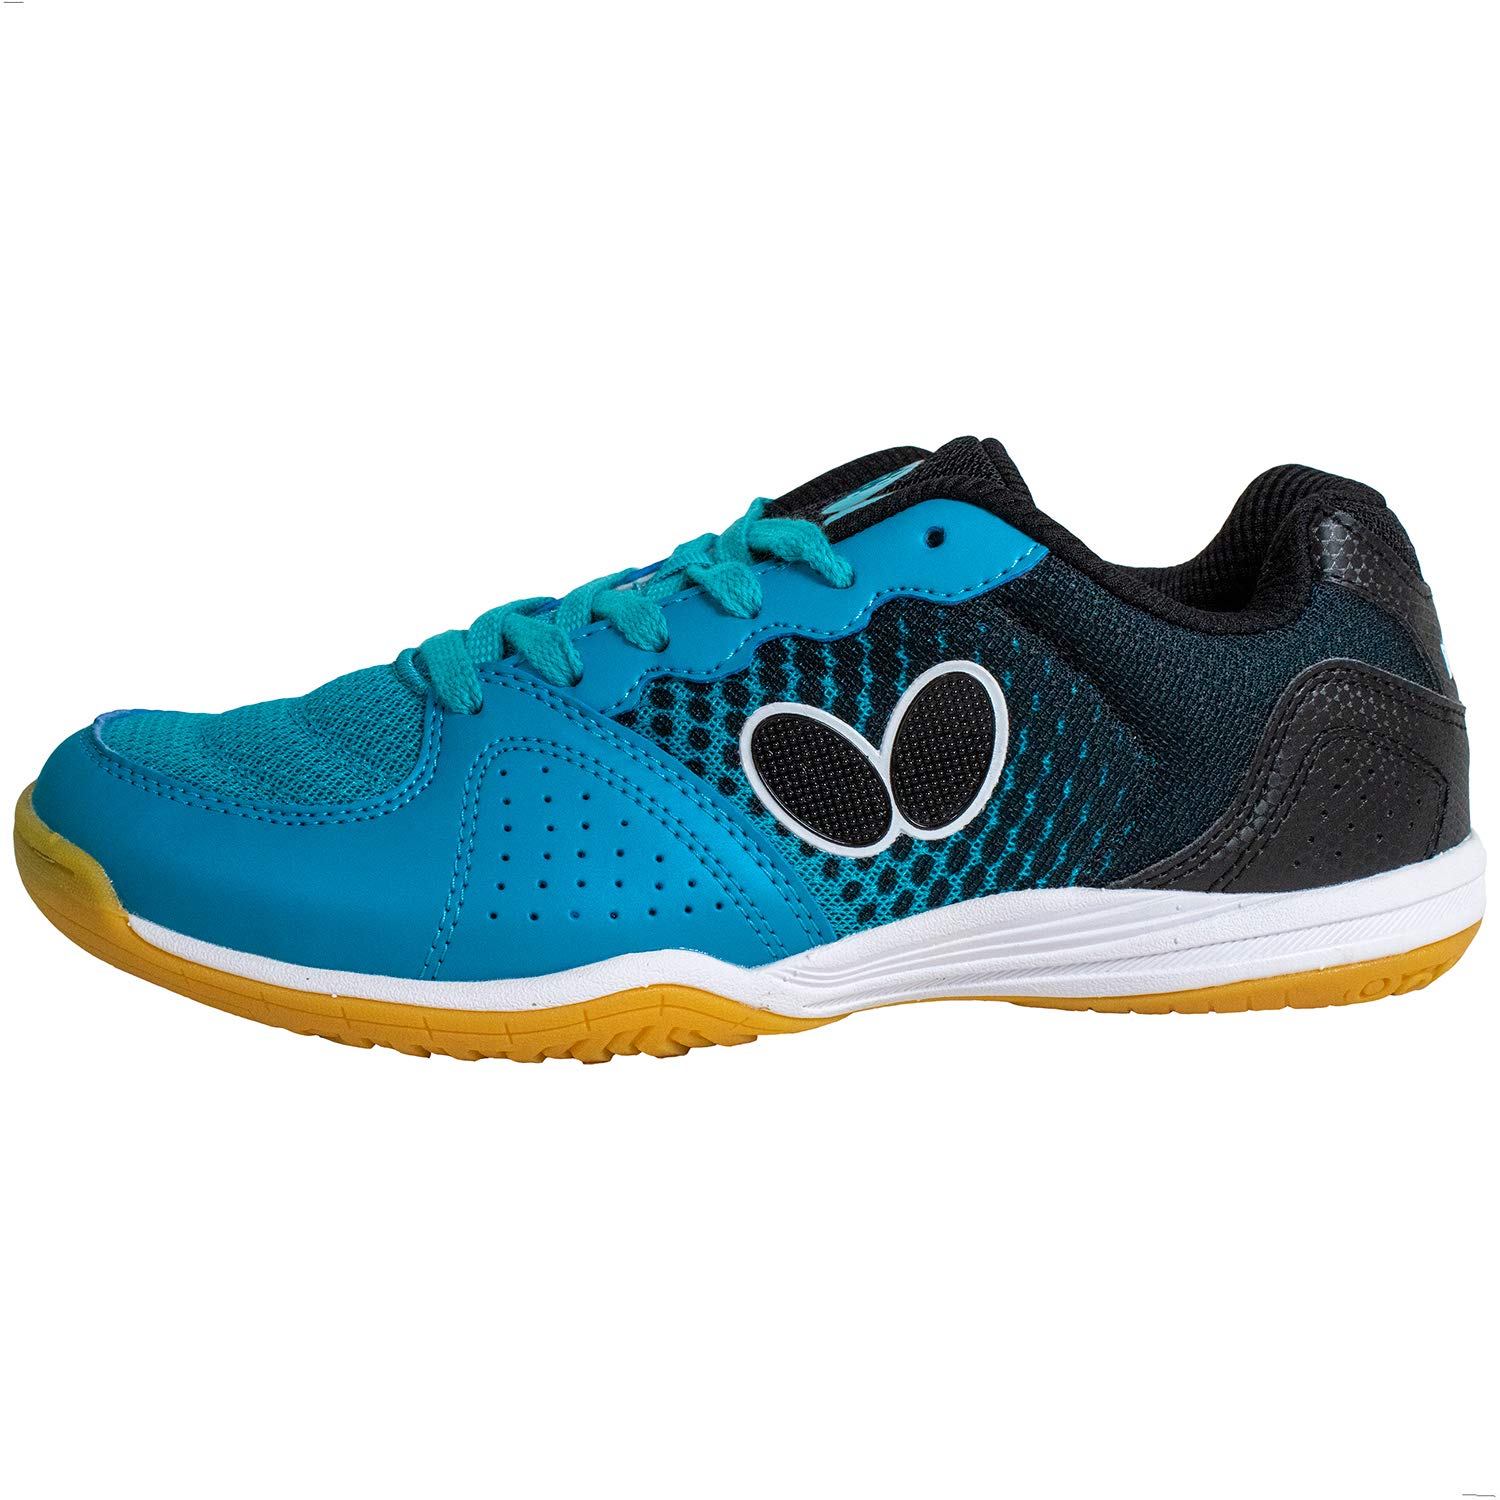 Butterfly Unisex Athletic Sneaker, Turquoise, 8.5 US Men